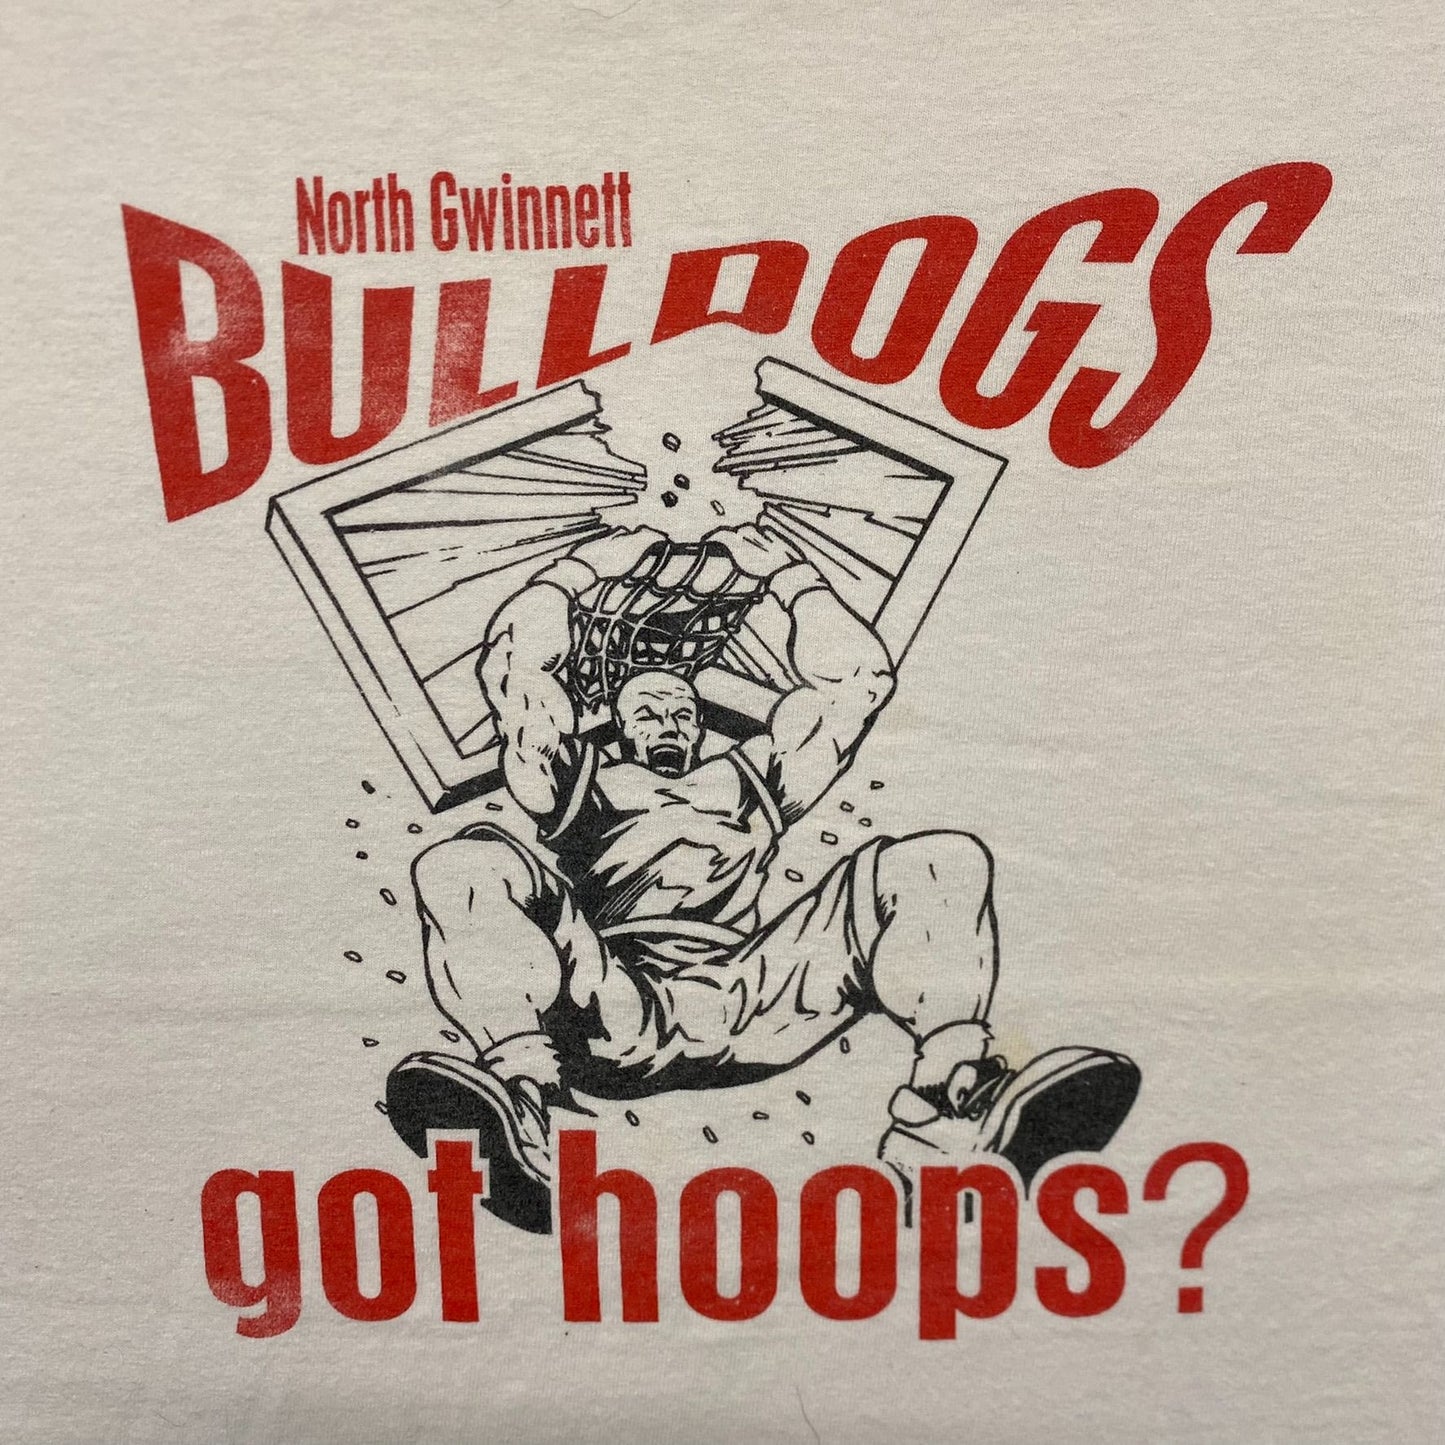 Vintage 90s Bulldogs Basketball Essential Baggy Sports Tee